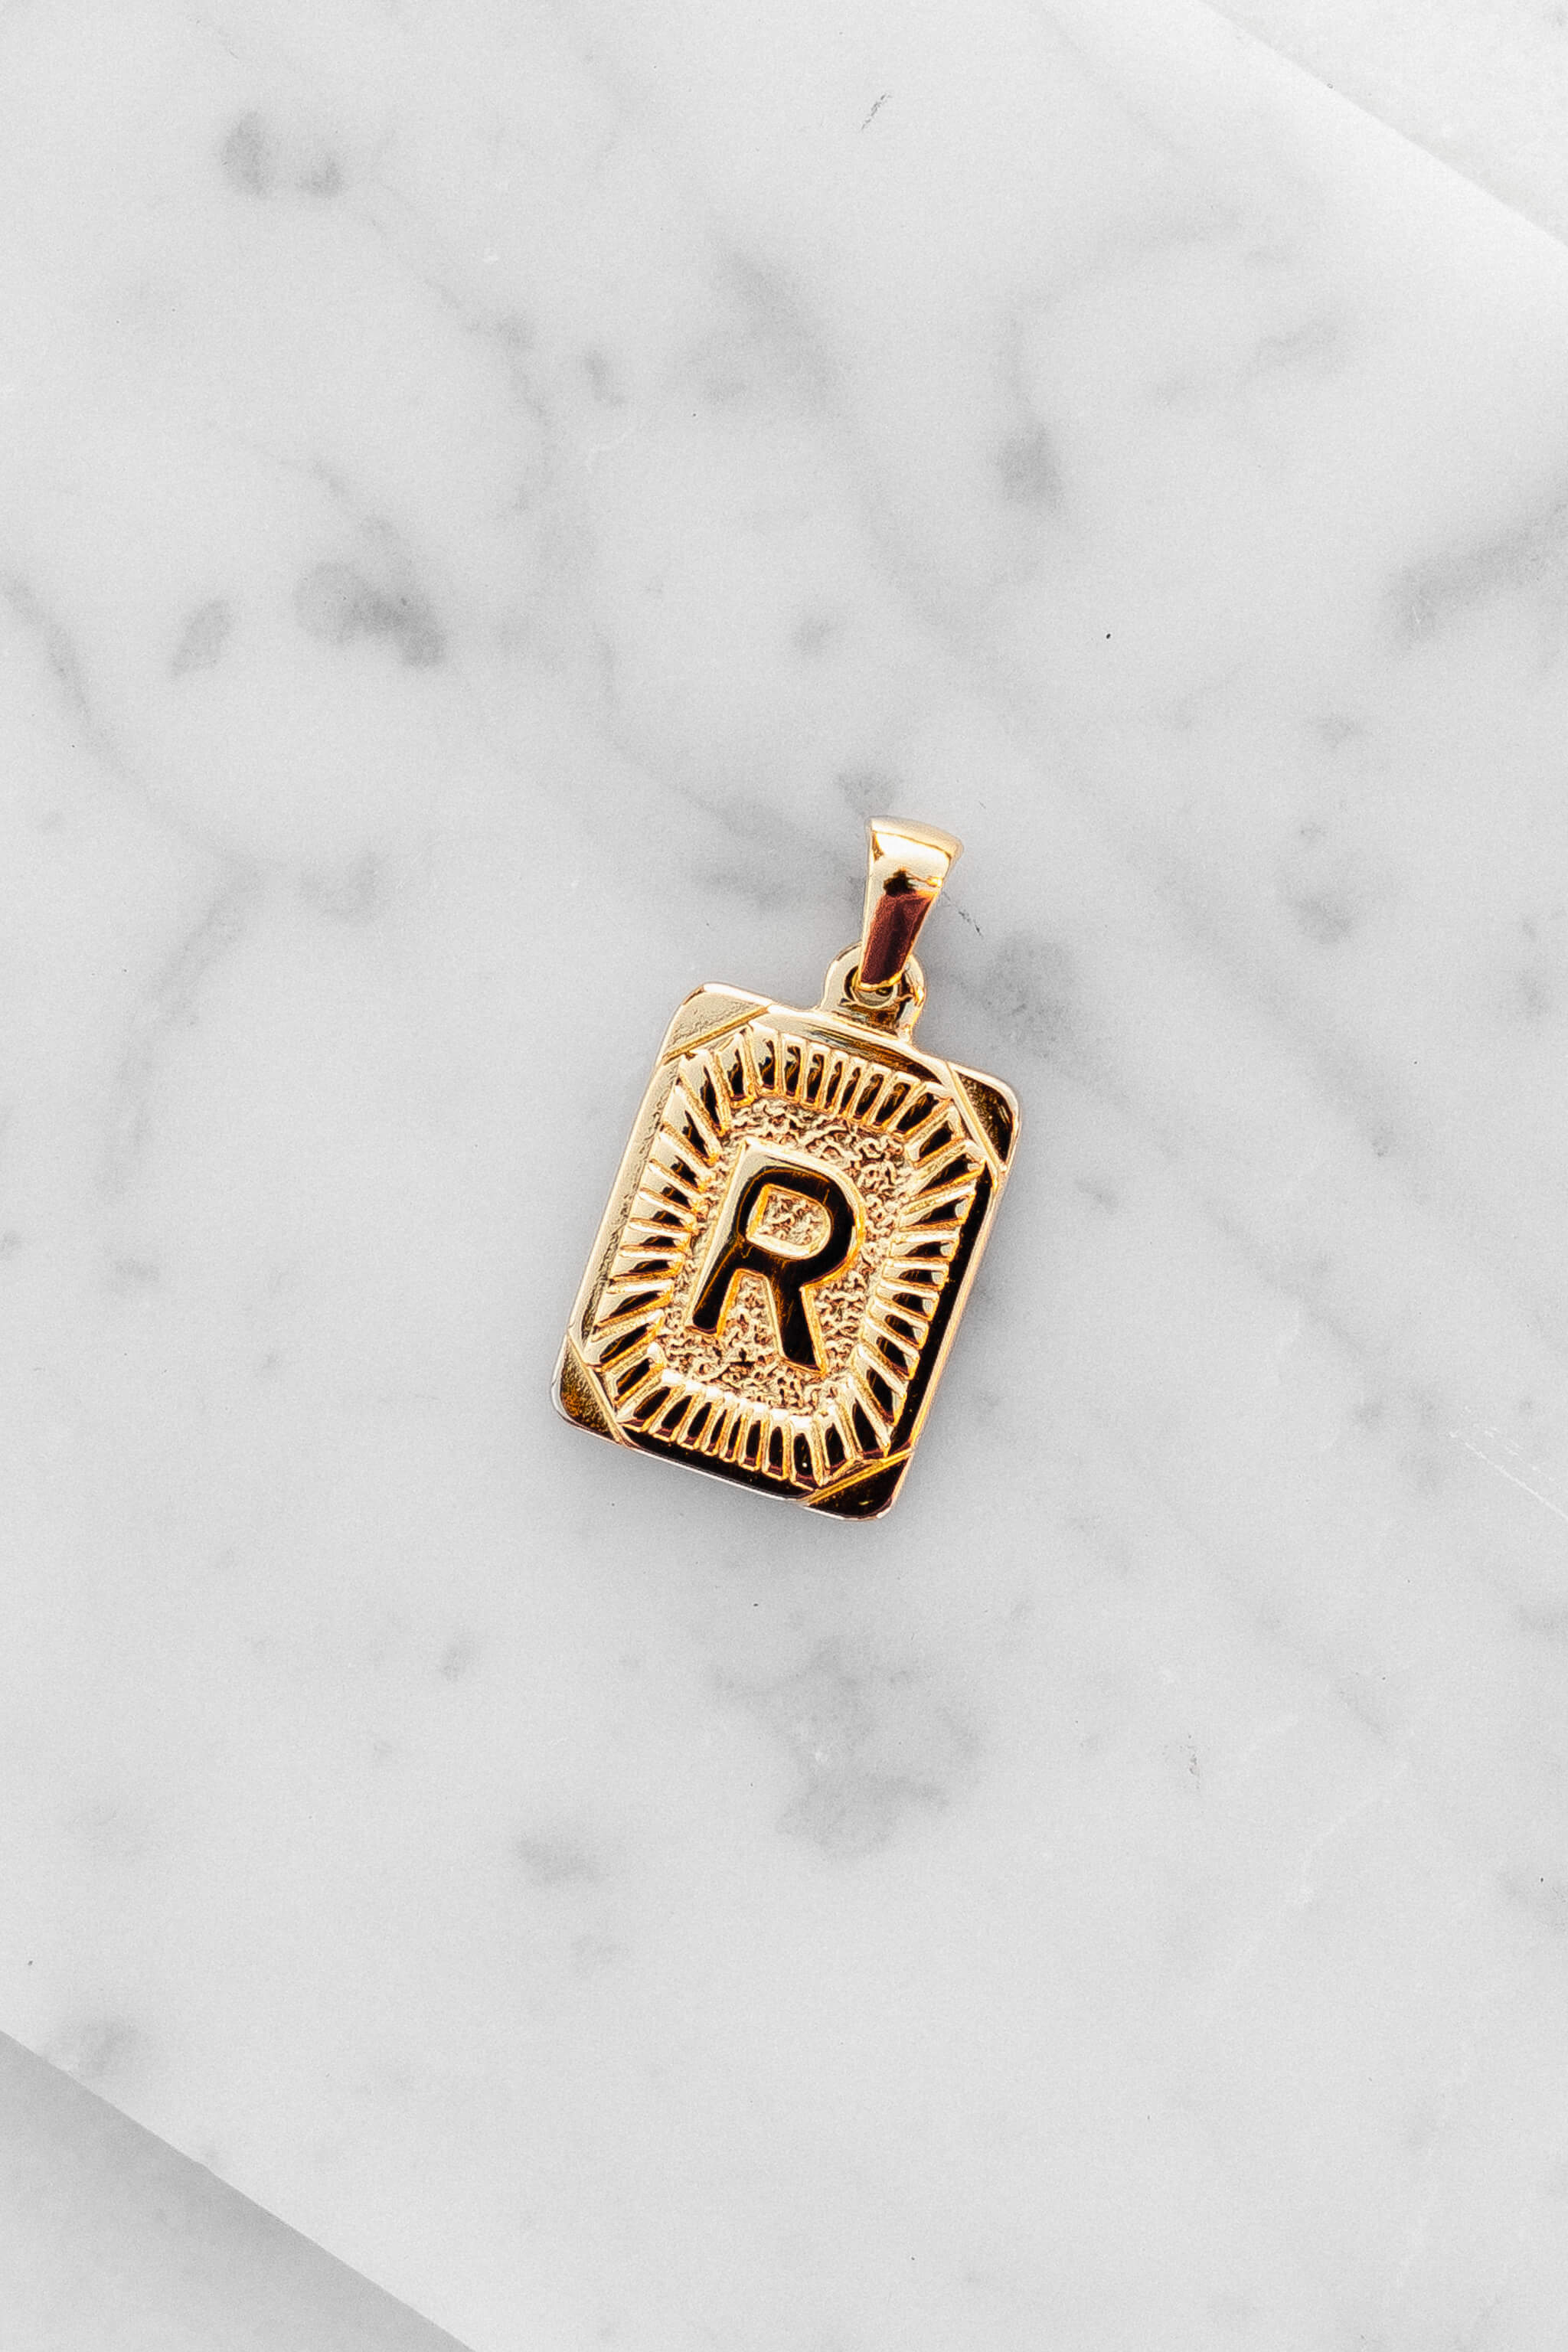 Gold Monogram Letter "R" Charm laying on a marble